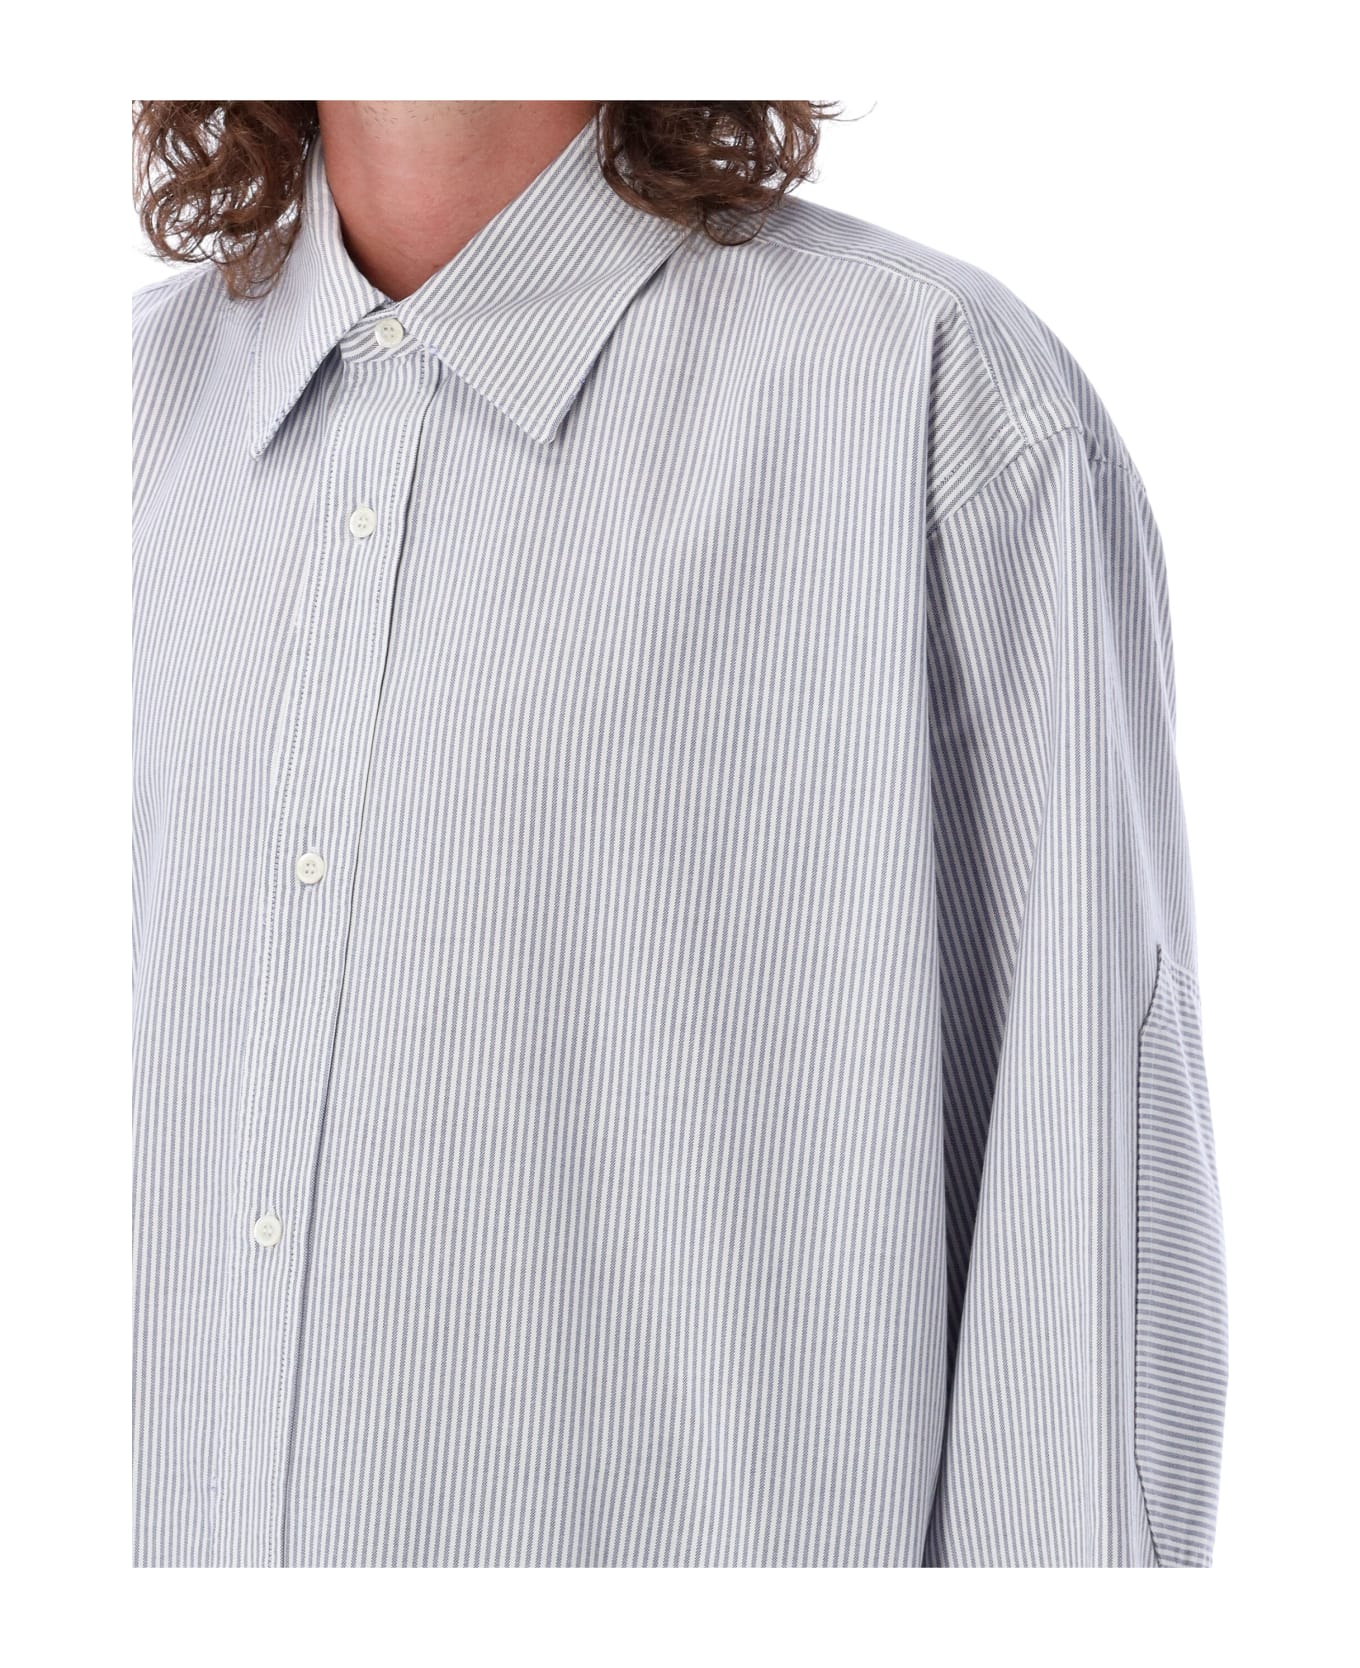 Palm Angels Striped Rugby Shirt - LIGHT BLUE STRIPE シャツ